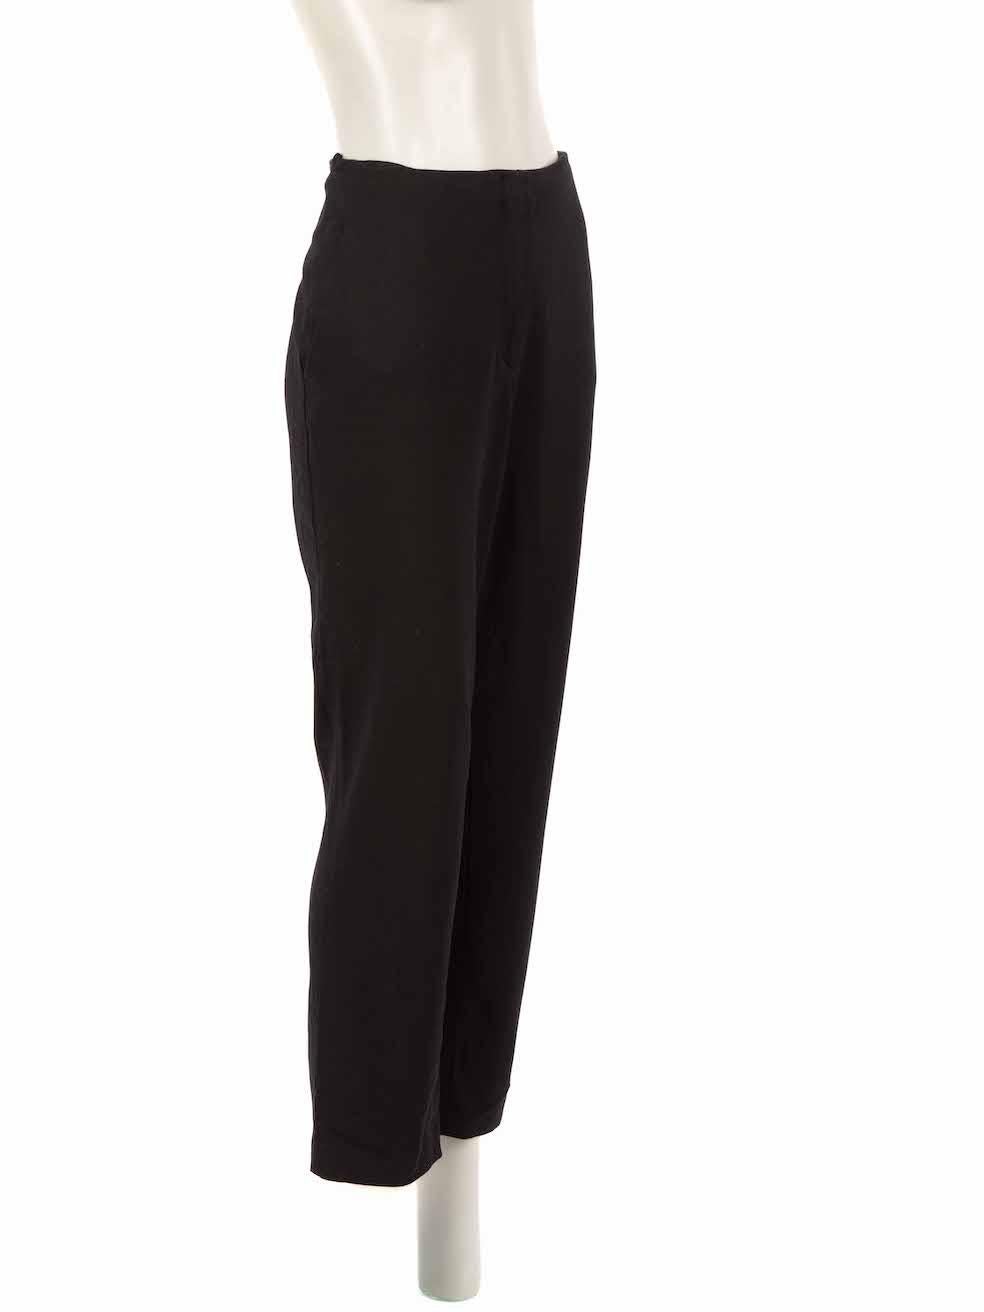 CONDITION is Very good. Hardly any visible wear to trousers is evident on this used Ralph Lauren designer resale item.
 
Details
Black
Wool
Trousers
Slim fit
Cropped
Mid rise
2x Side pockets
Fly zip, hook and button fastening
 
Made in Portugal
